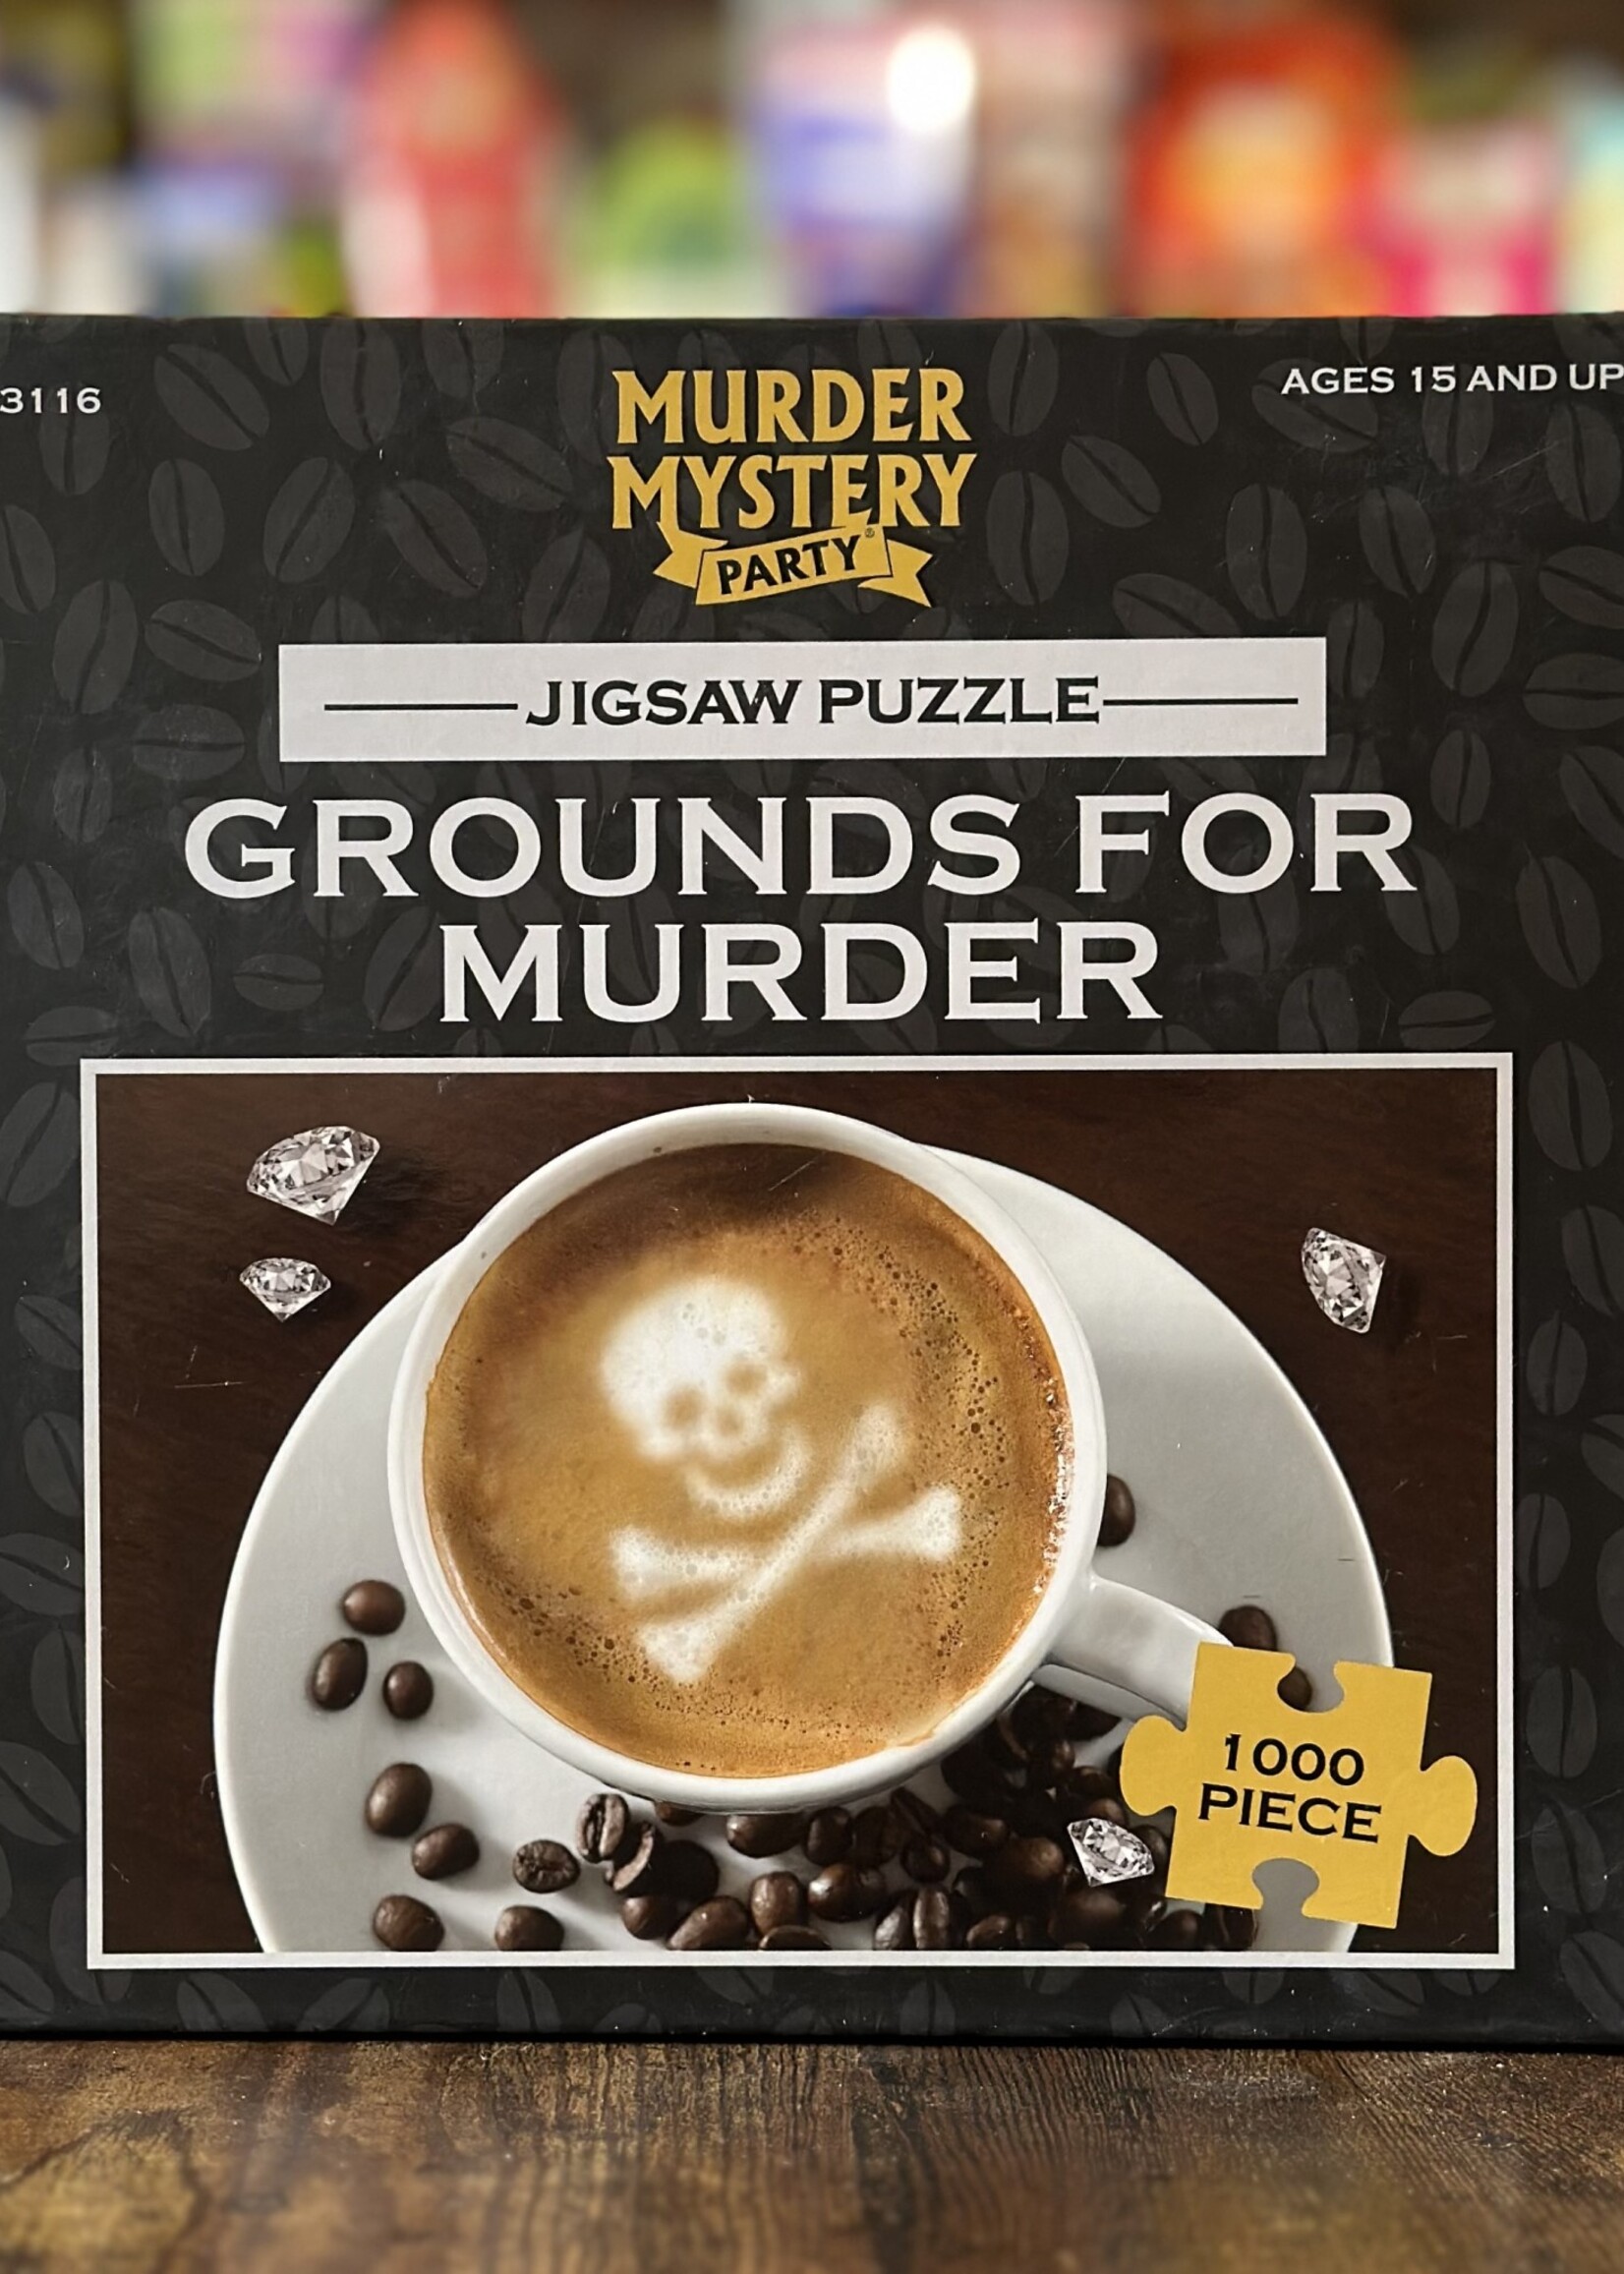 University Games Puzzle - Grounds for Murder (Murder Mystery Party) 1000 Pc.